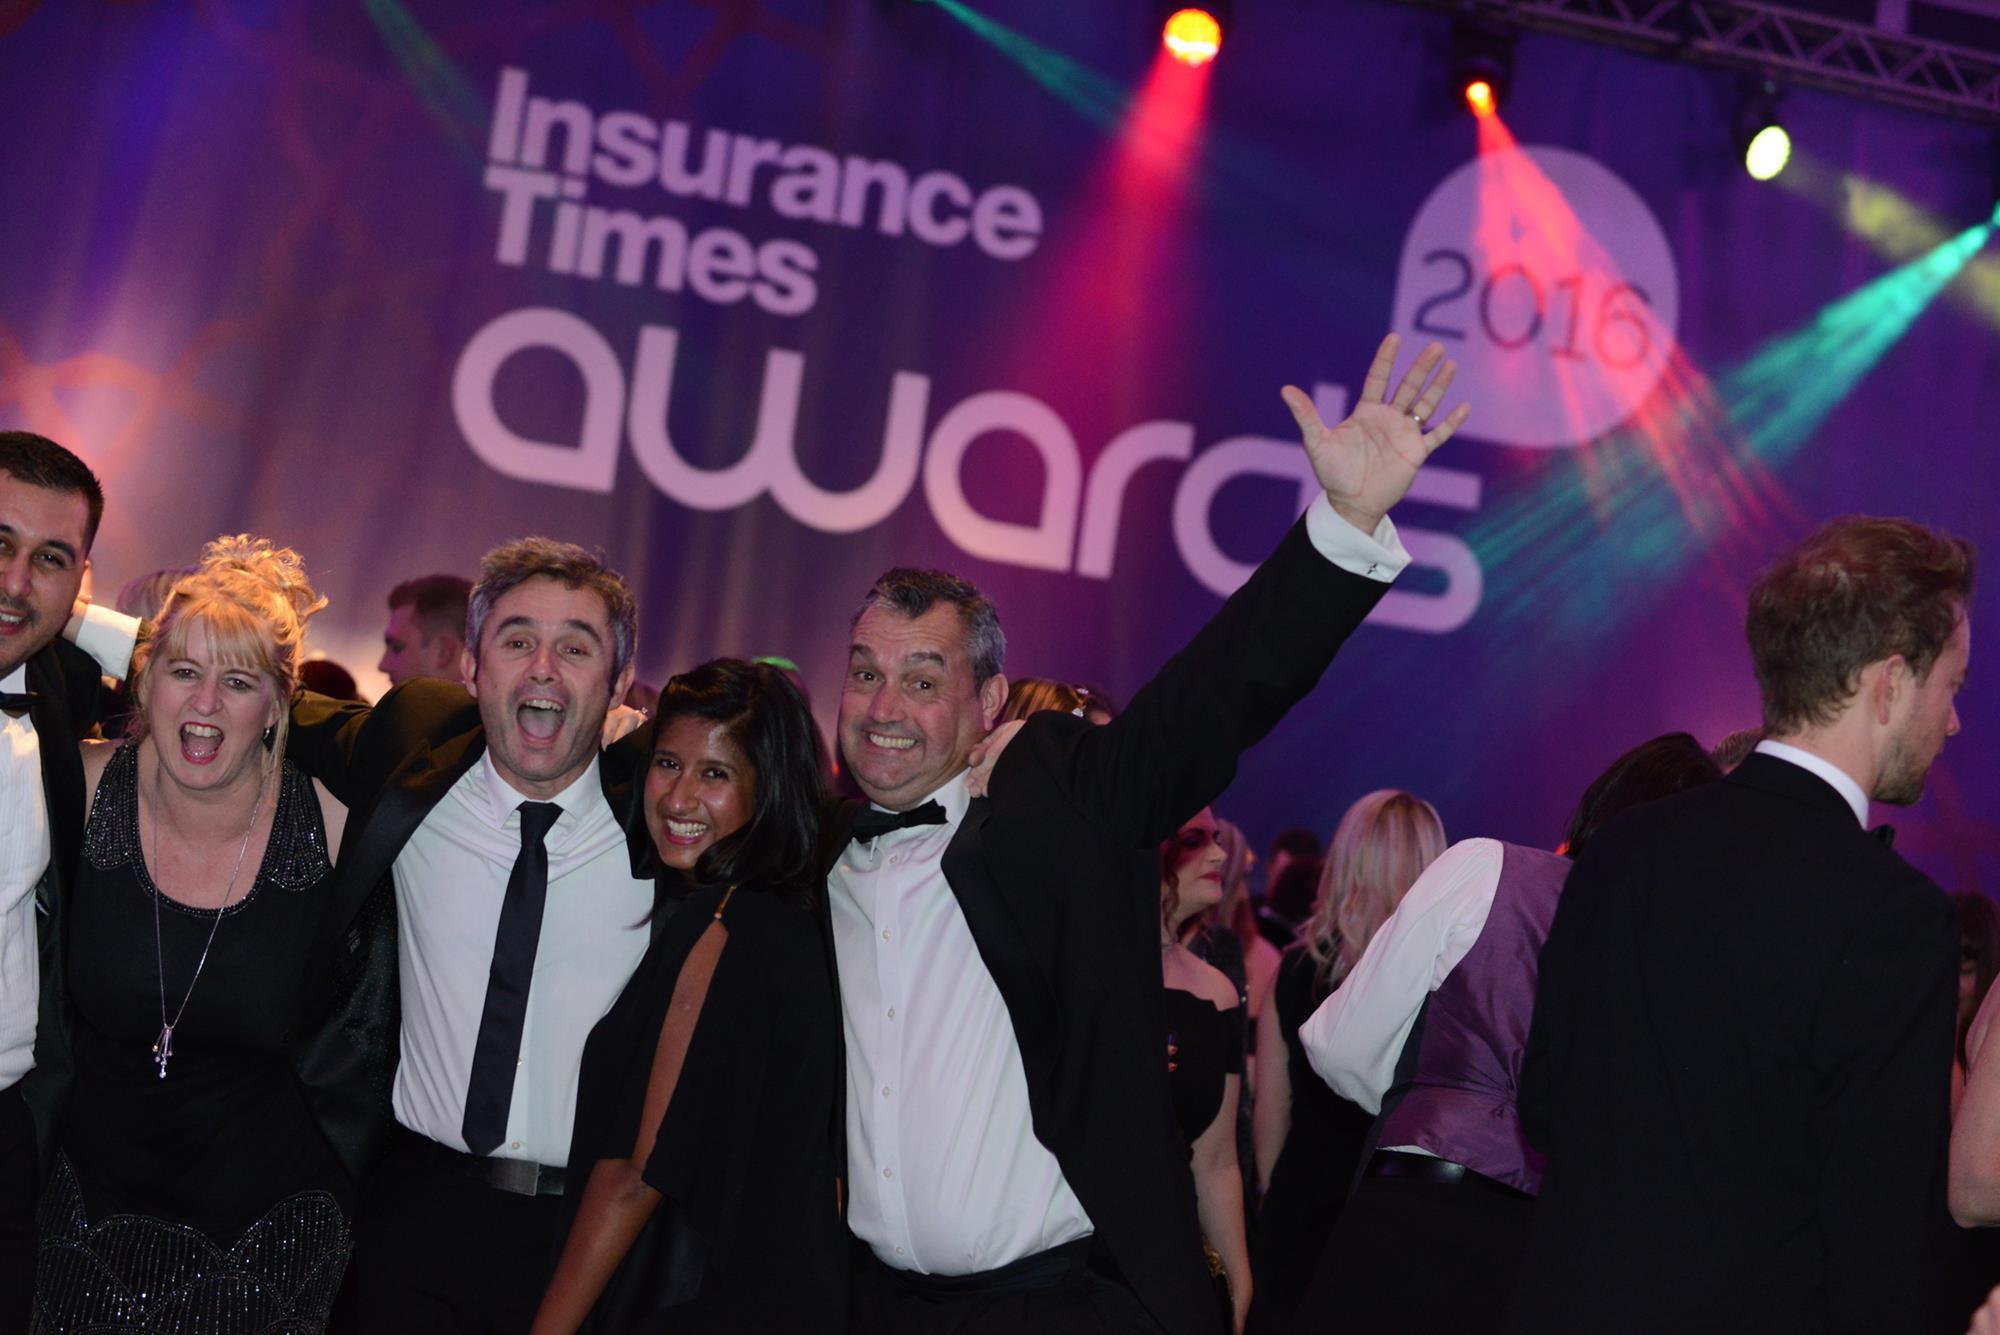 In Pictures: The Insurance Times Awards 2016